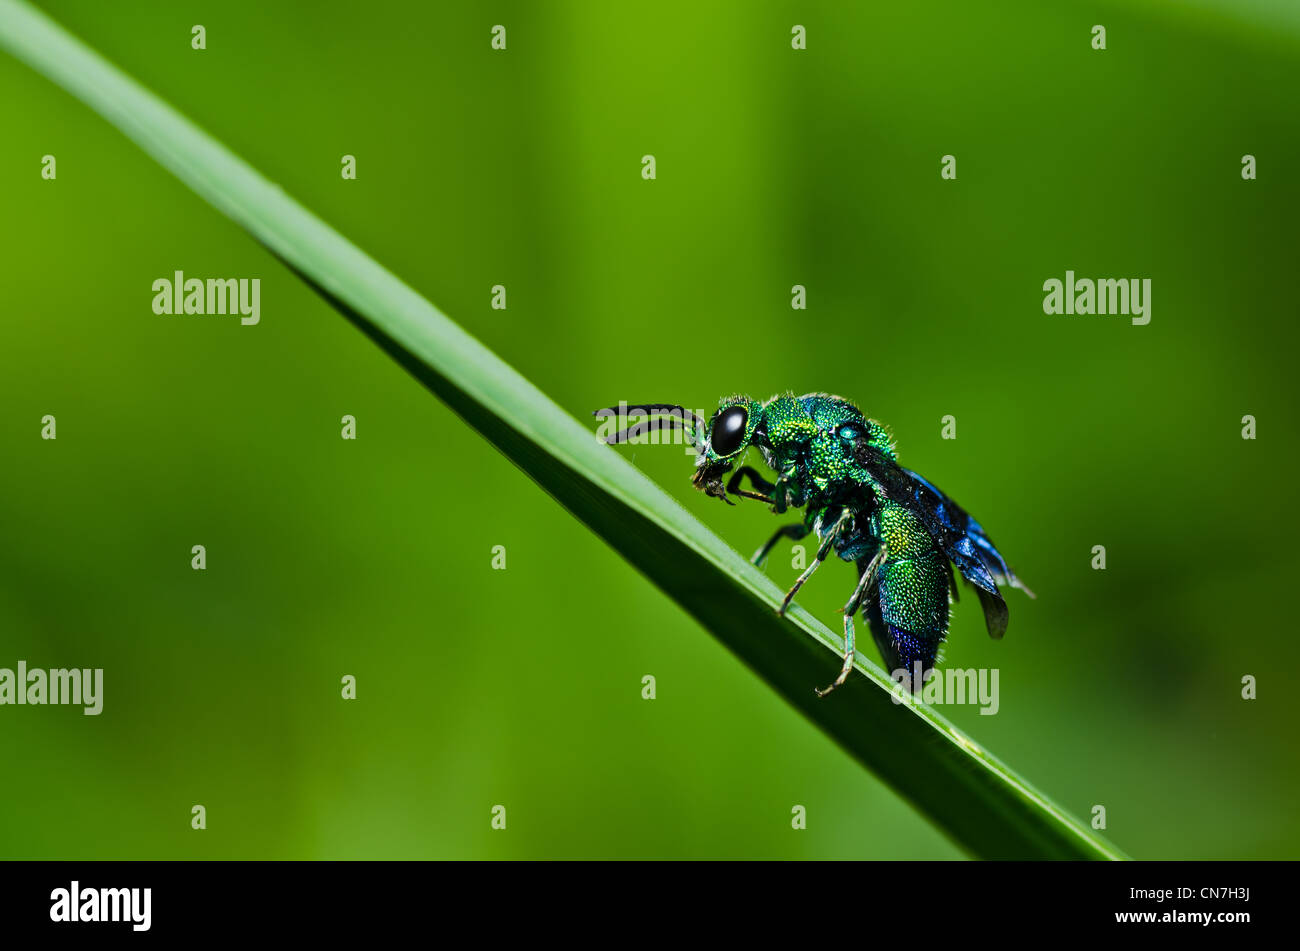 wasp in green nature or in garden. It's danger. Stock Photo